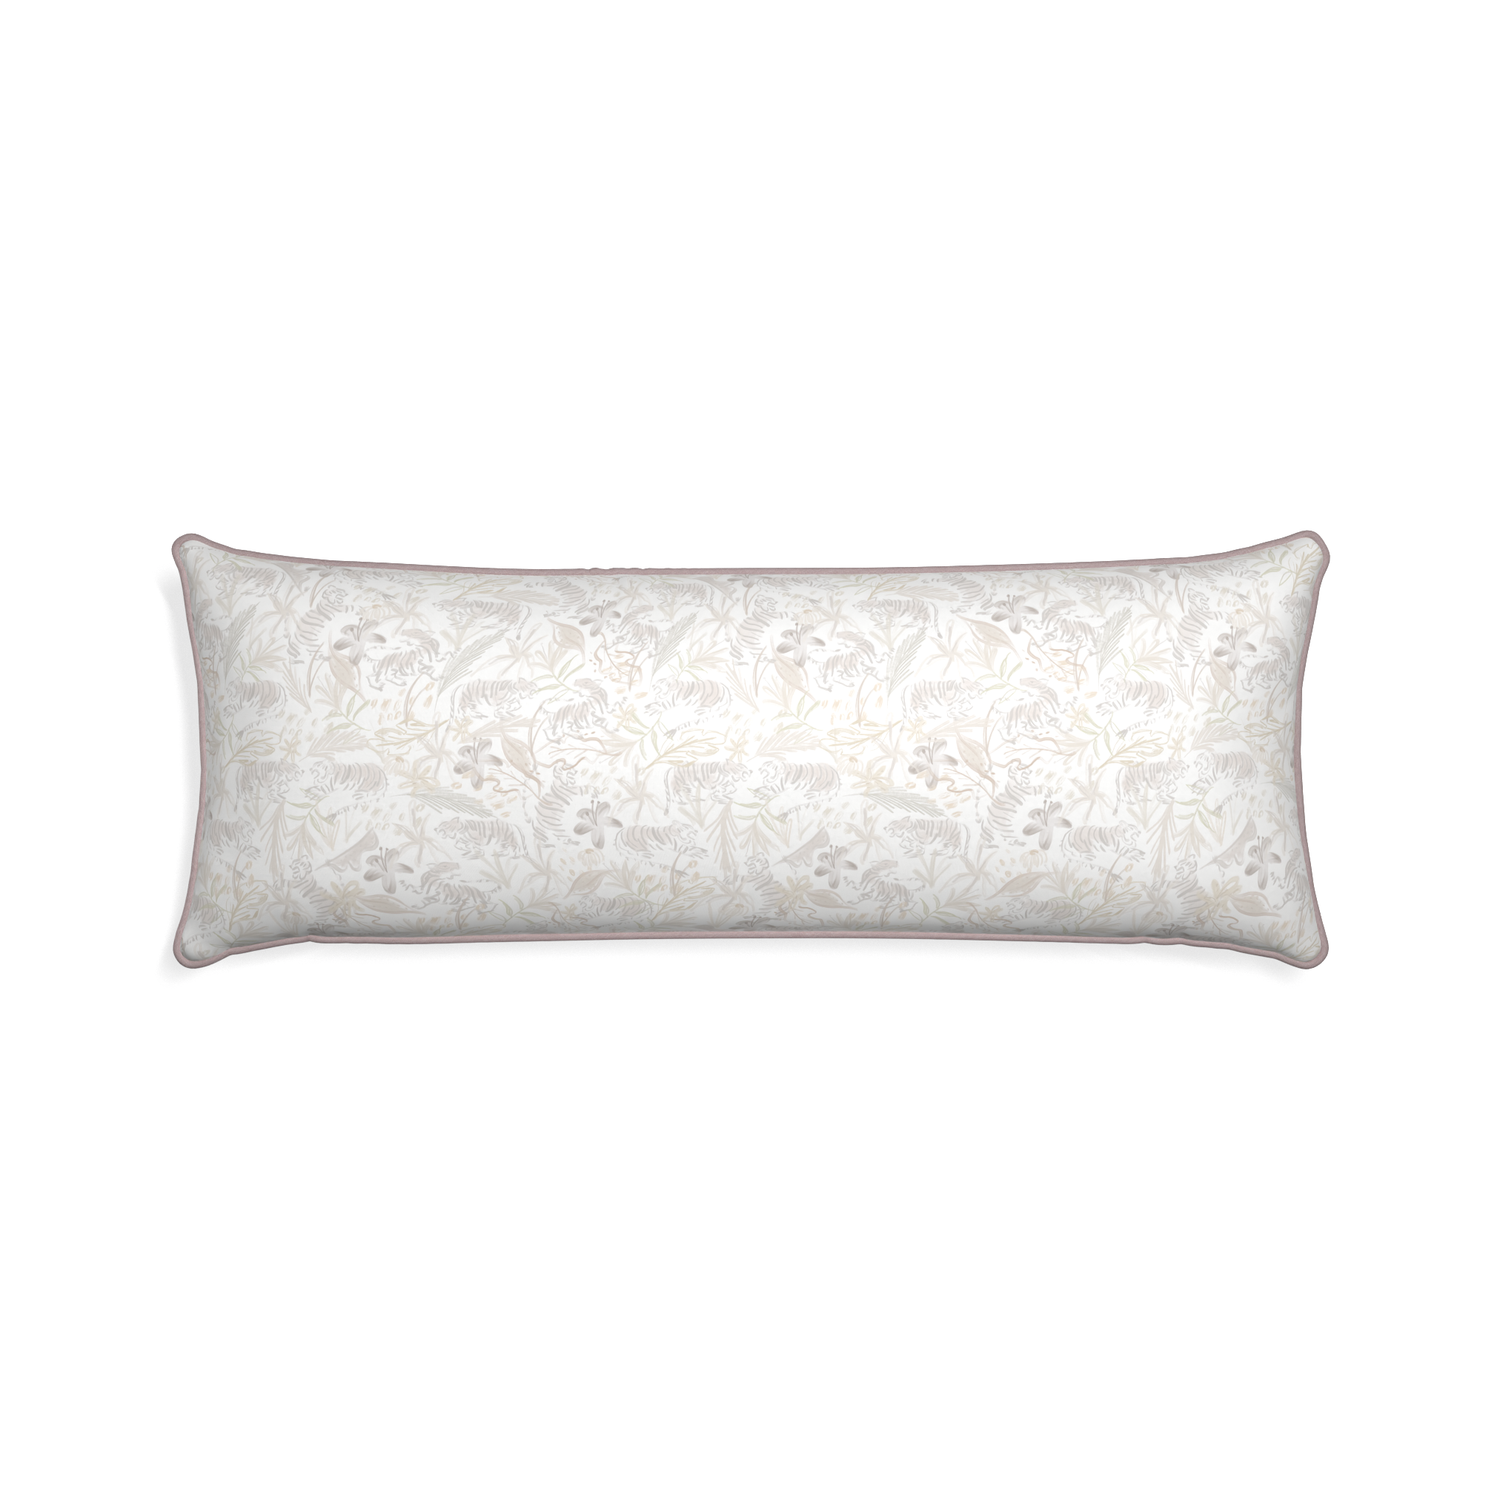 Xl-lumbar frida sand custom beige chinoiserie tigerpillow with orchid piping on white background